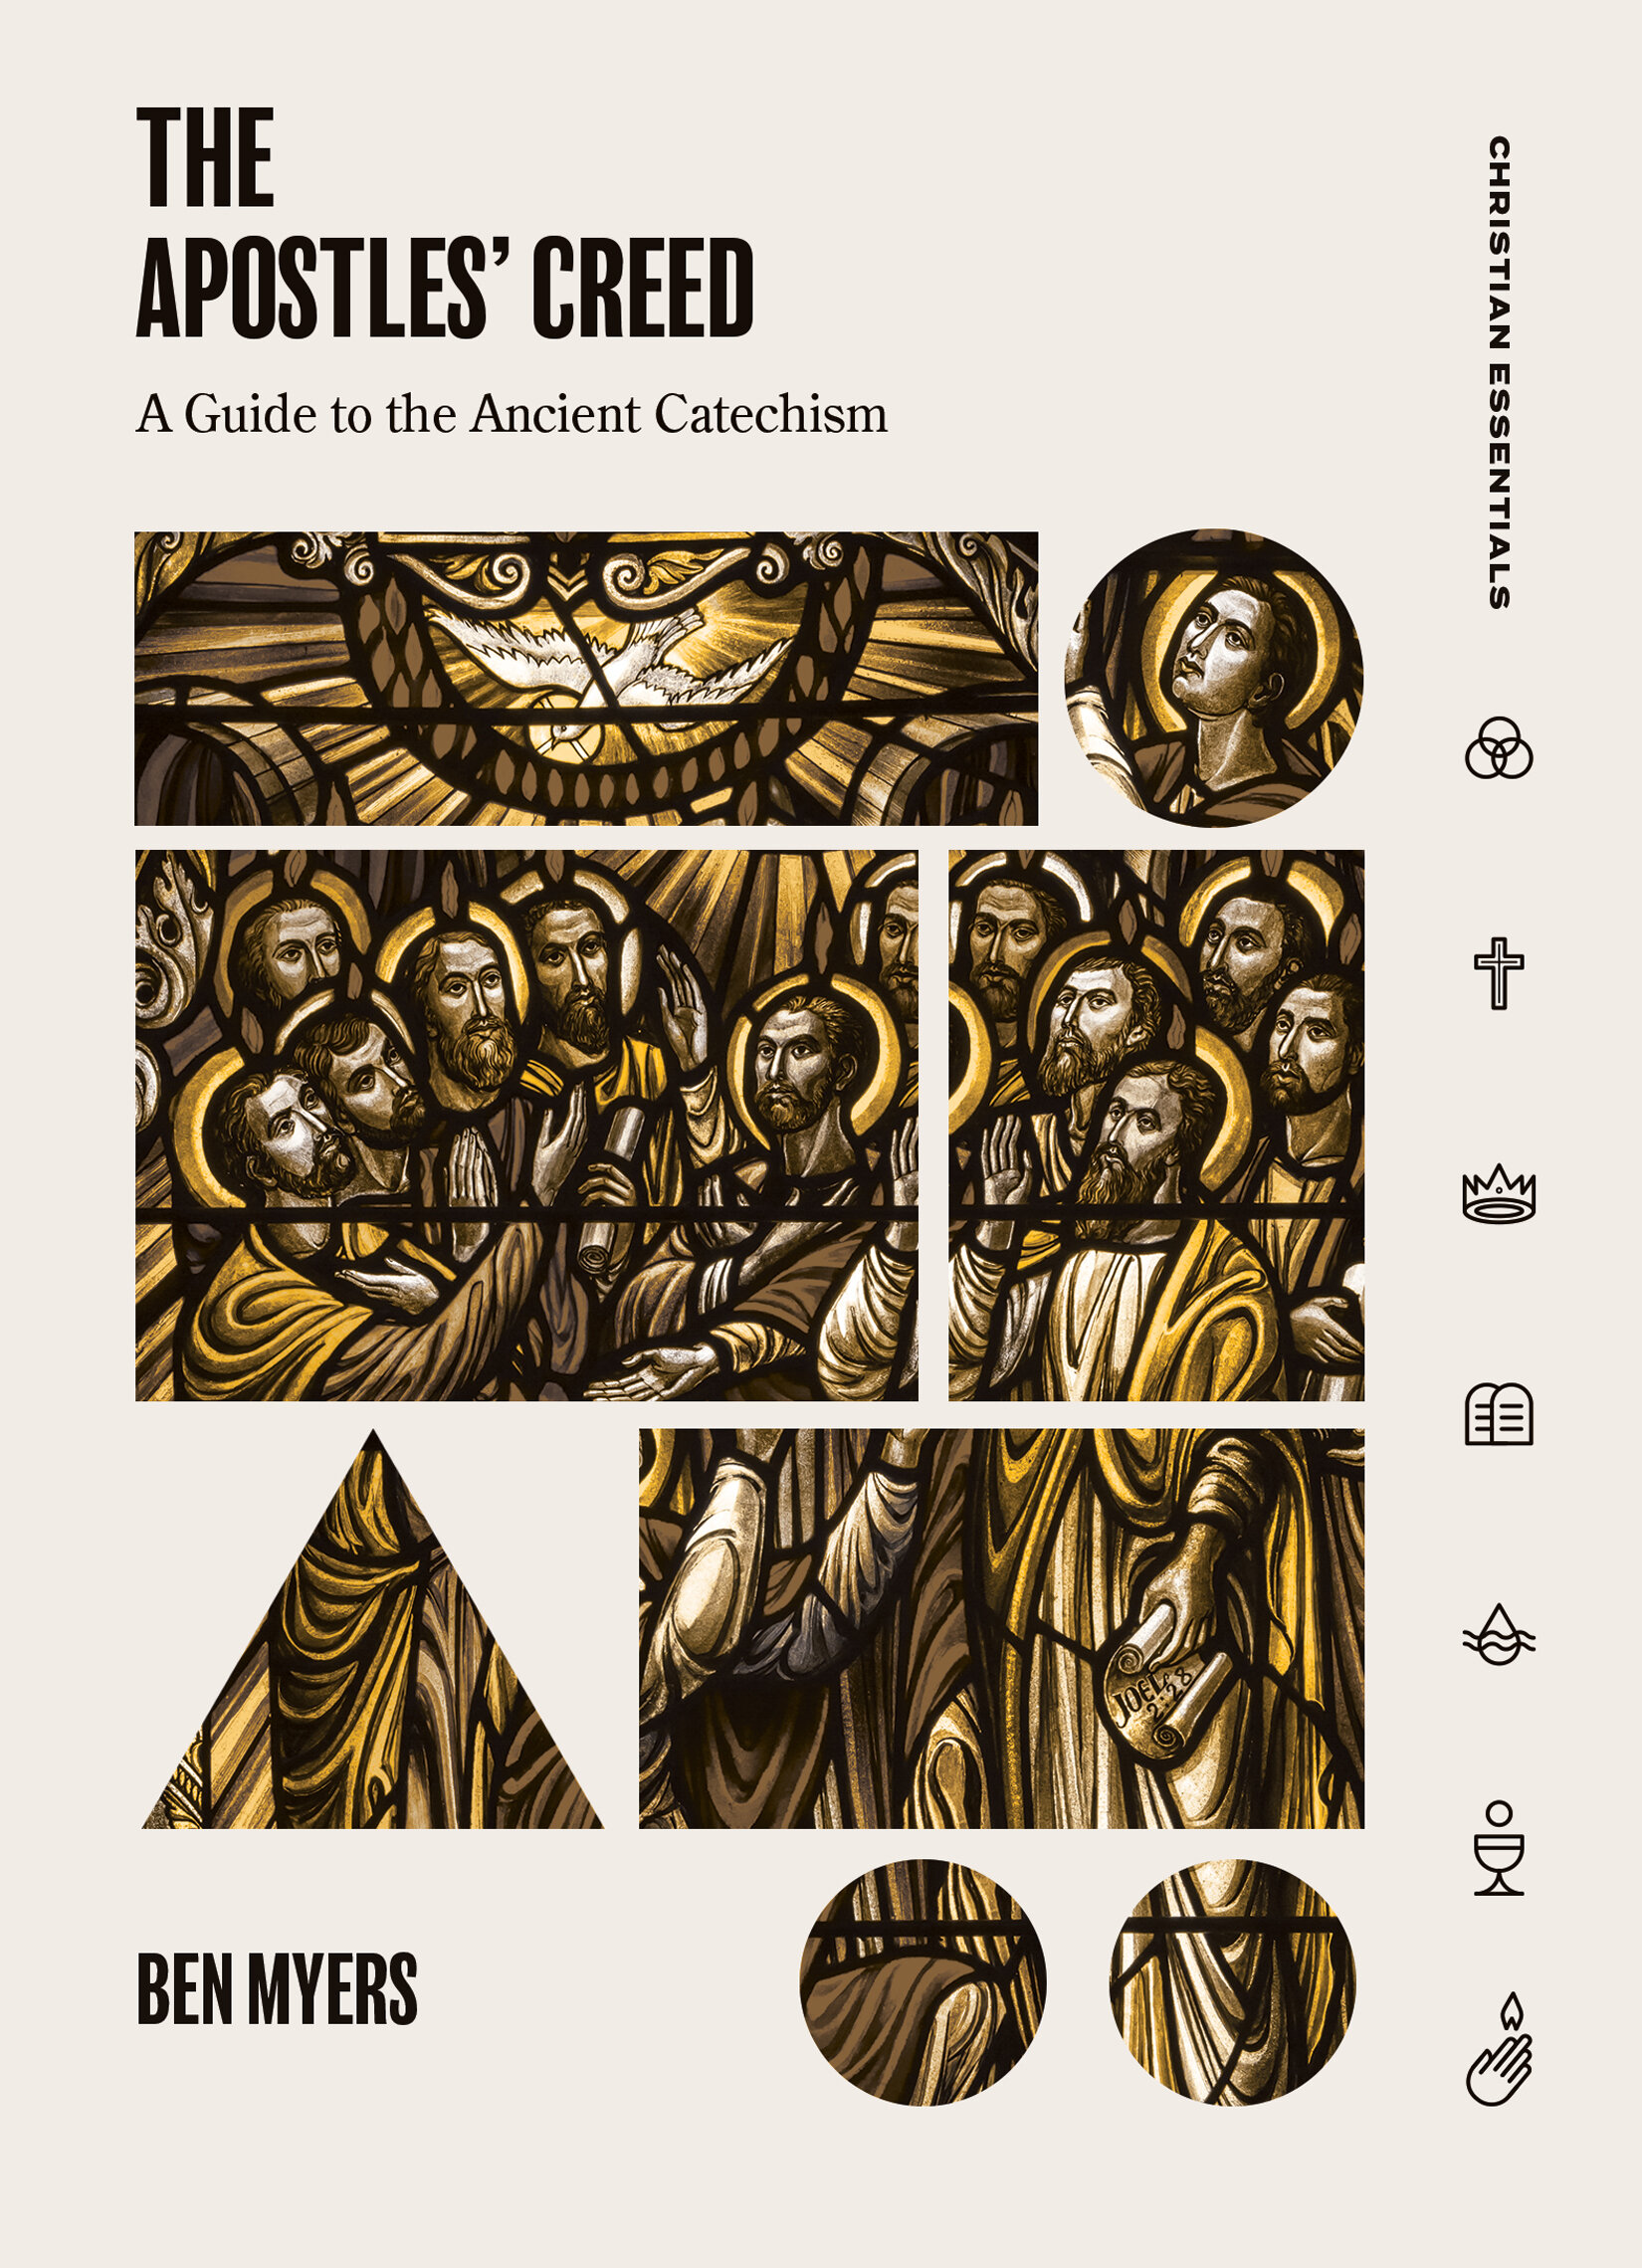 The Apostles’ Creed: A Guide to the Ancient Catechism